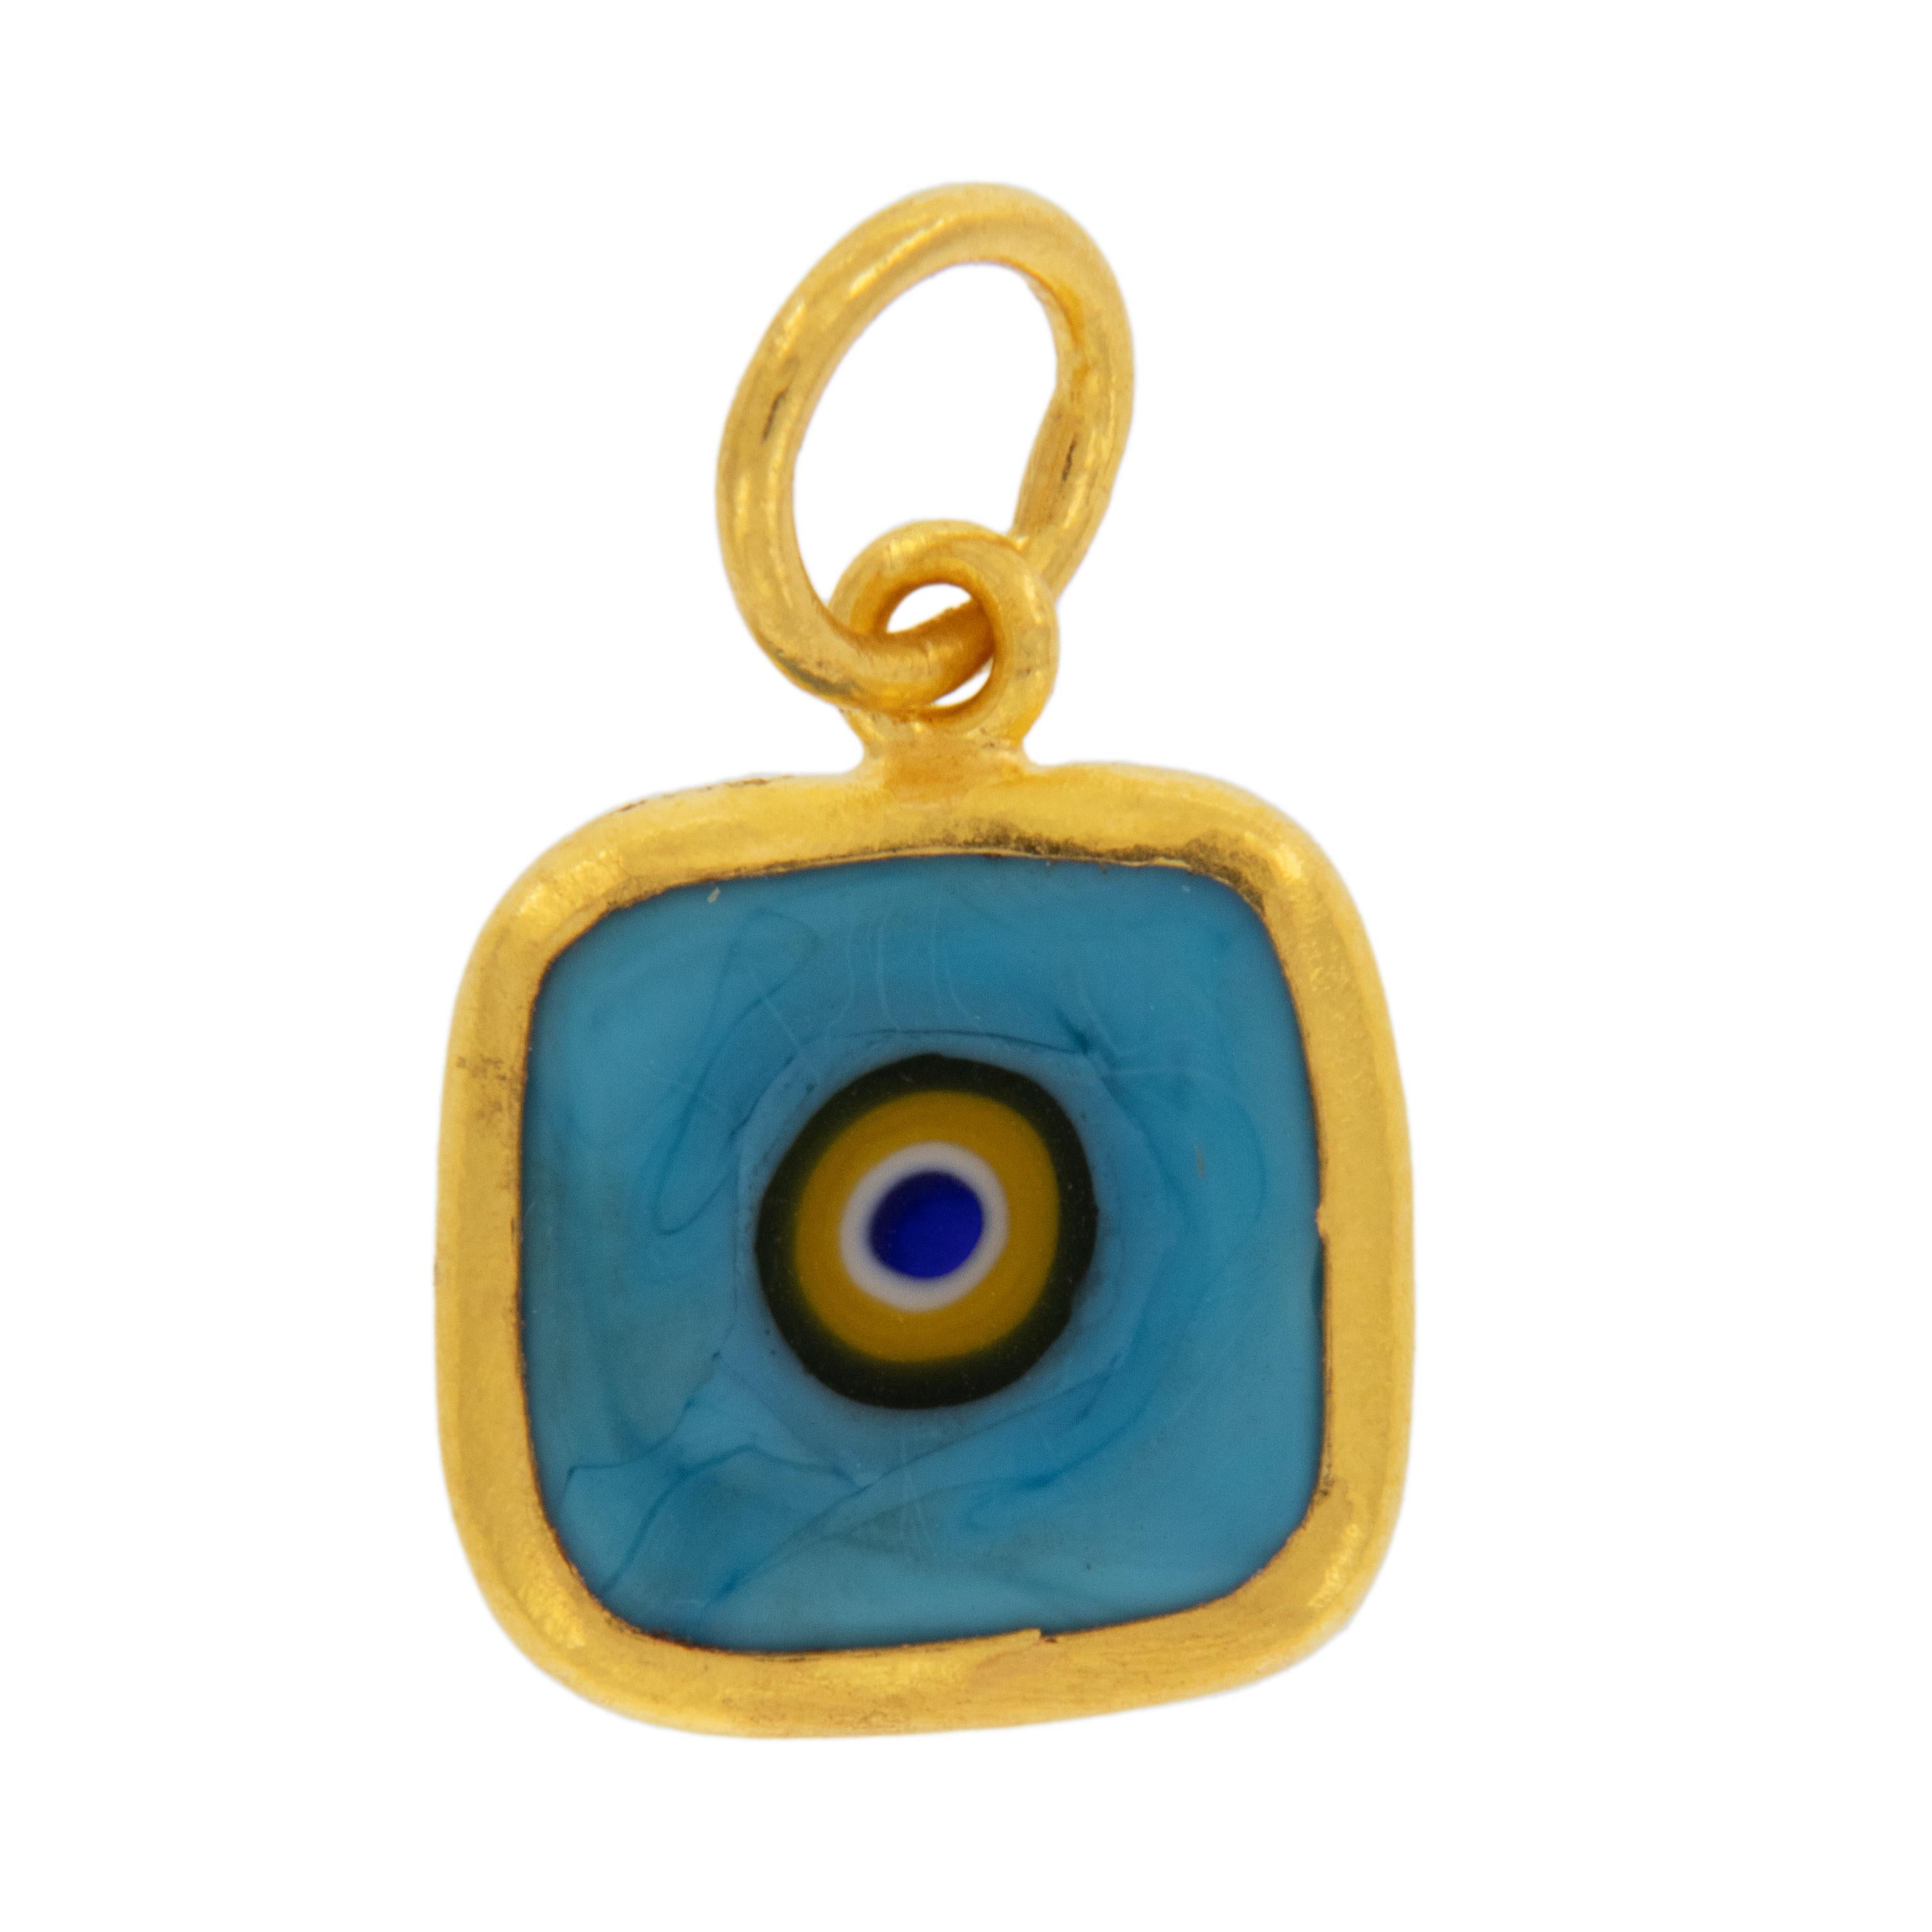 Nothing is more luxurious than pure 24 karat gold! It has such a warm, sunshine reminiscent color that is further enhanced with the color of turquoise- people the world over have revered turquoise as a good luck stone for centuries. This evil eye